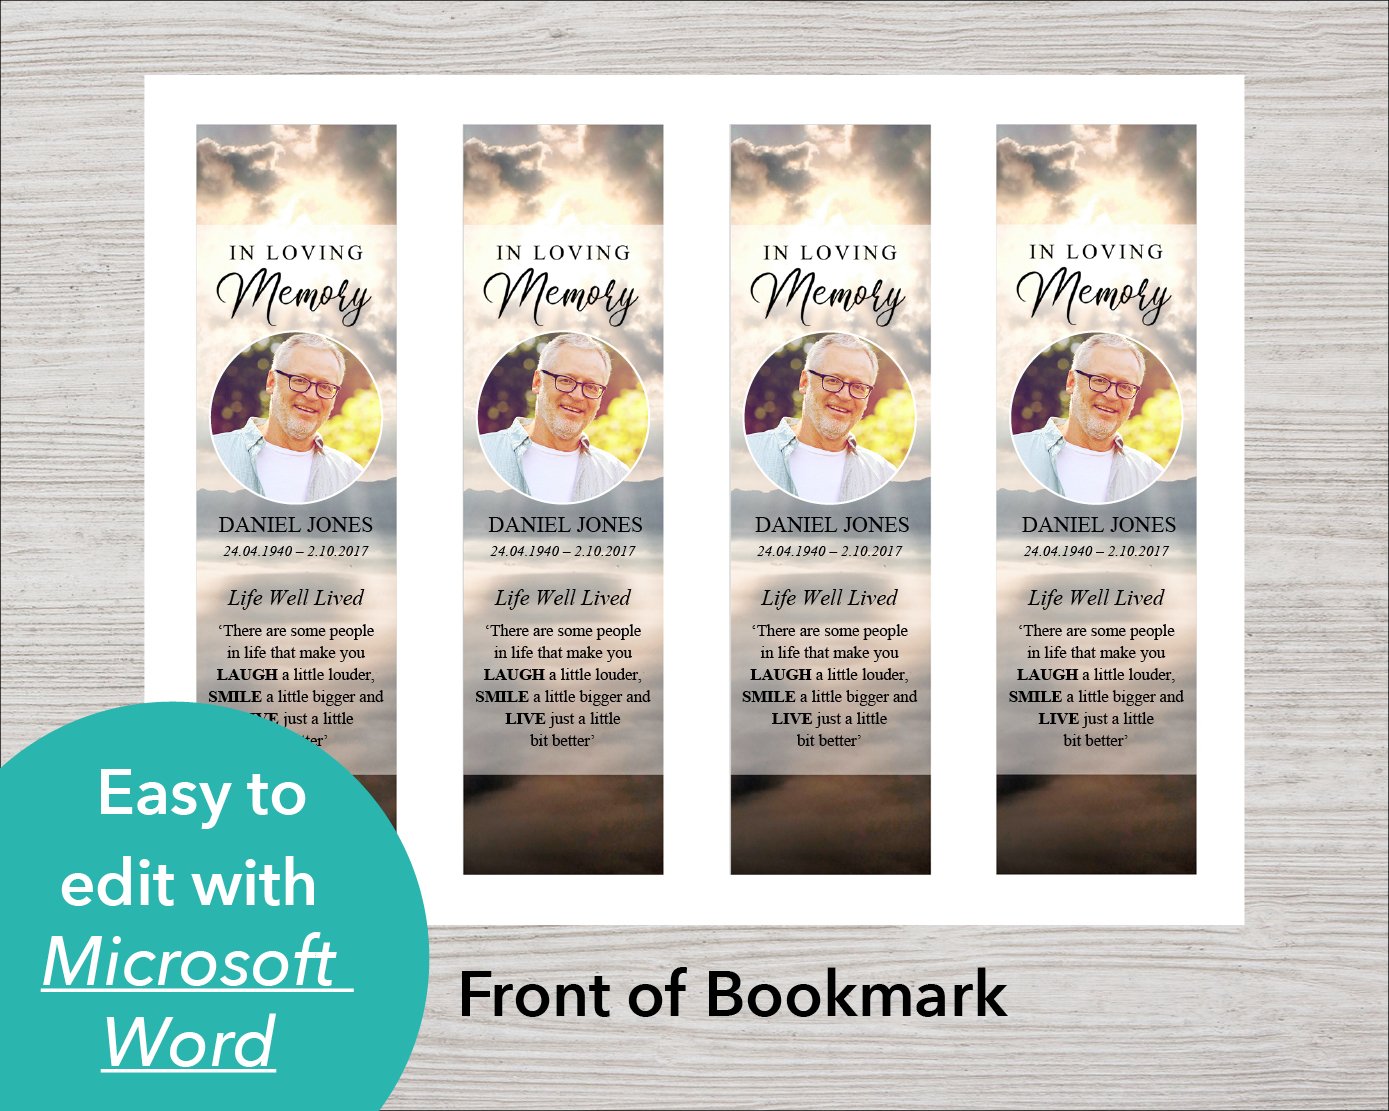 Mountain Funeral Welcome Sign + Slide Show, Bookmark, Share a Memory Sign & Cards